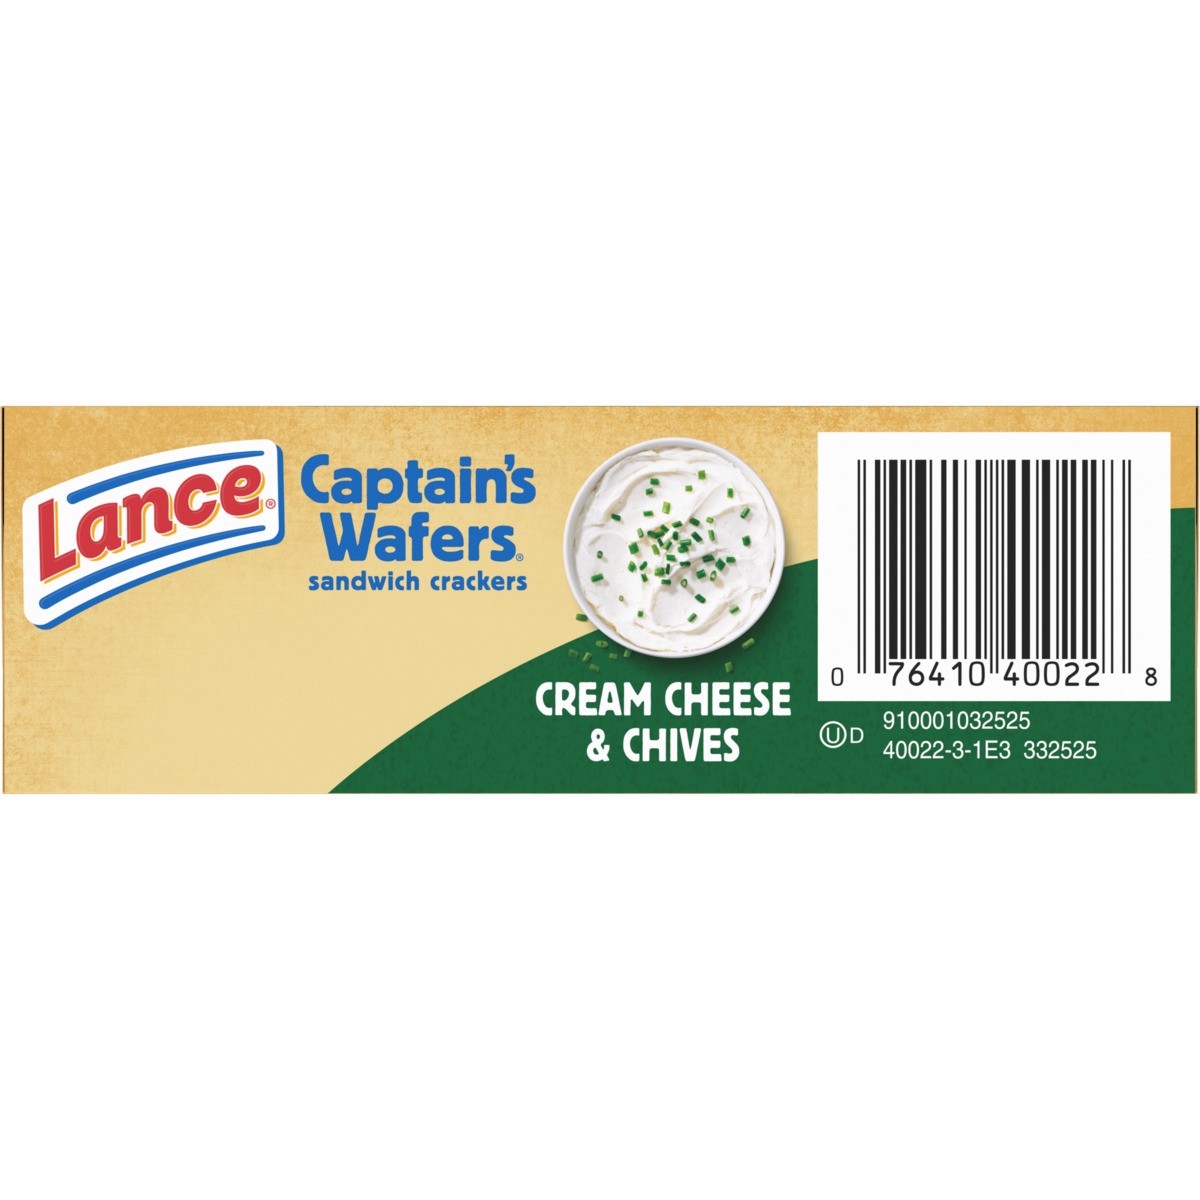 slide 5 of 11, Lance Sandwich Crackers, Captain's Wafers Cream Cheese and Chives, 6 Packs, 4 Sandwiches Each, 5.5 oz